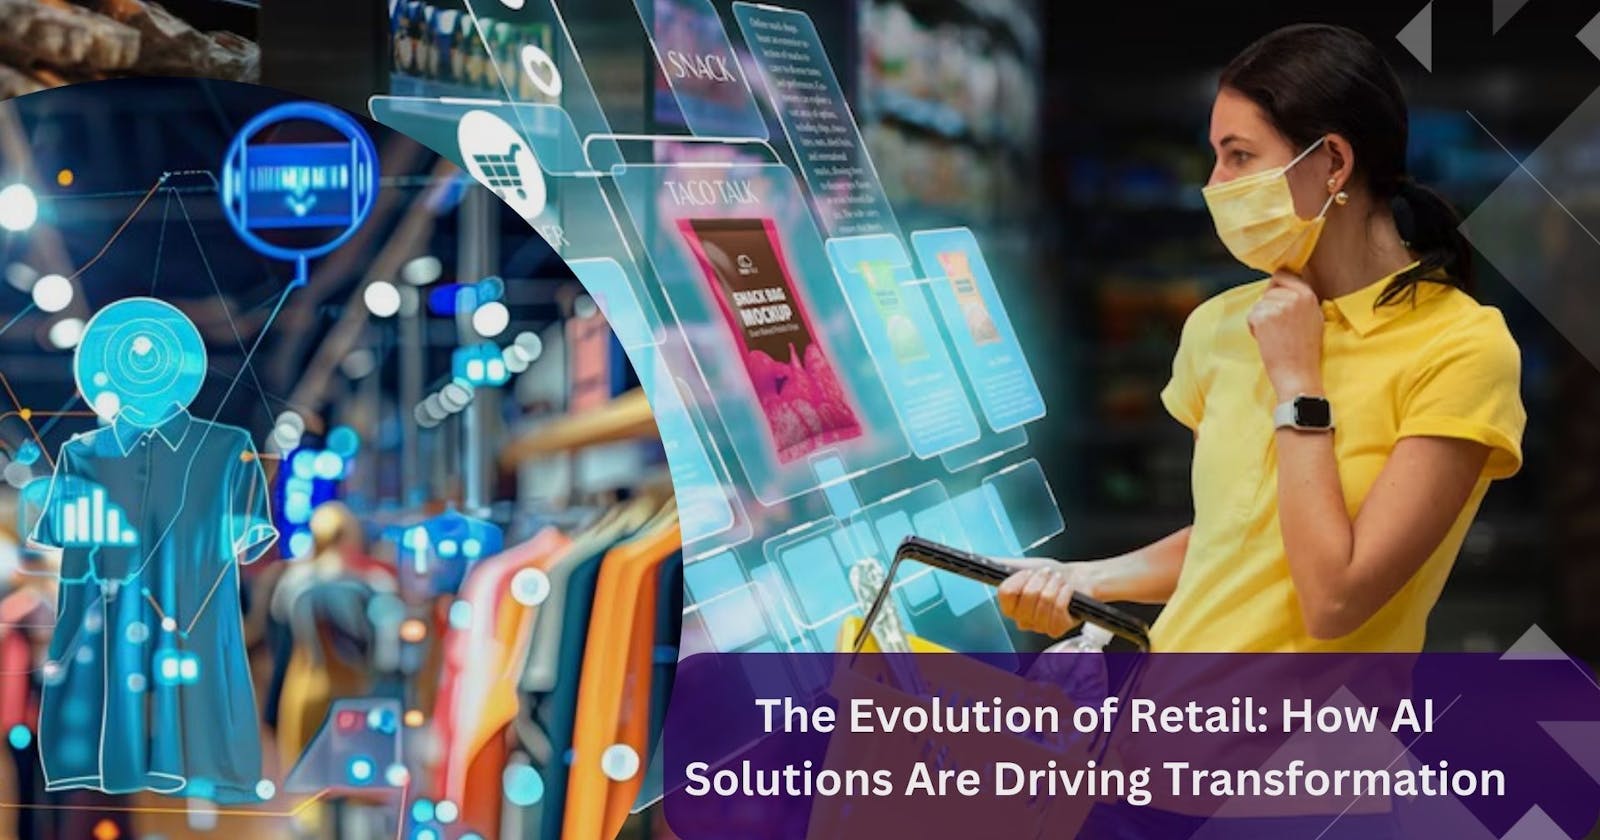 The Evolution of Retail: How AI Solutions Are Driving Transformation